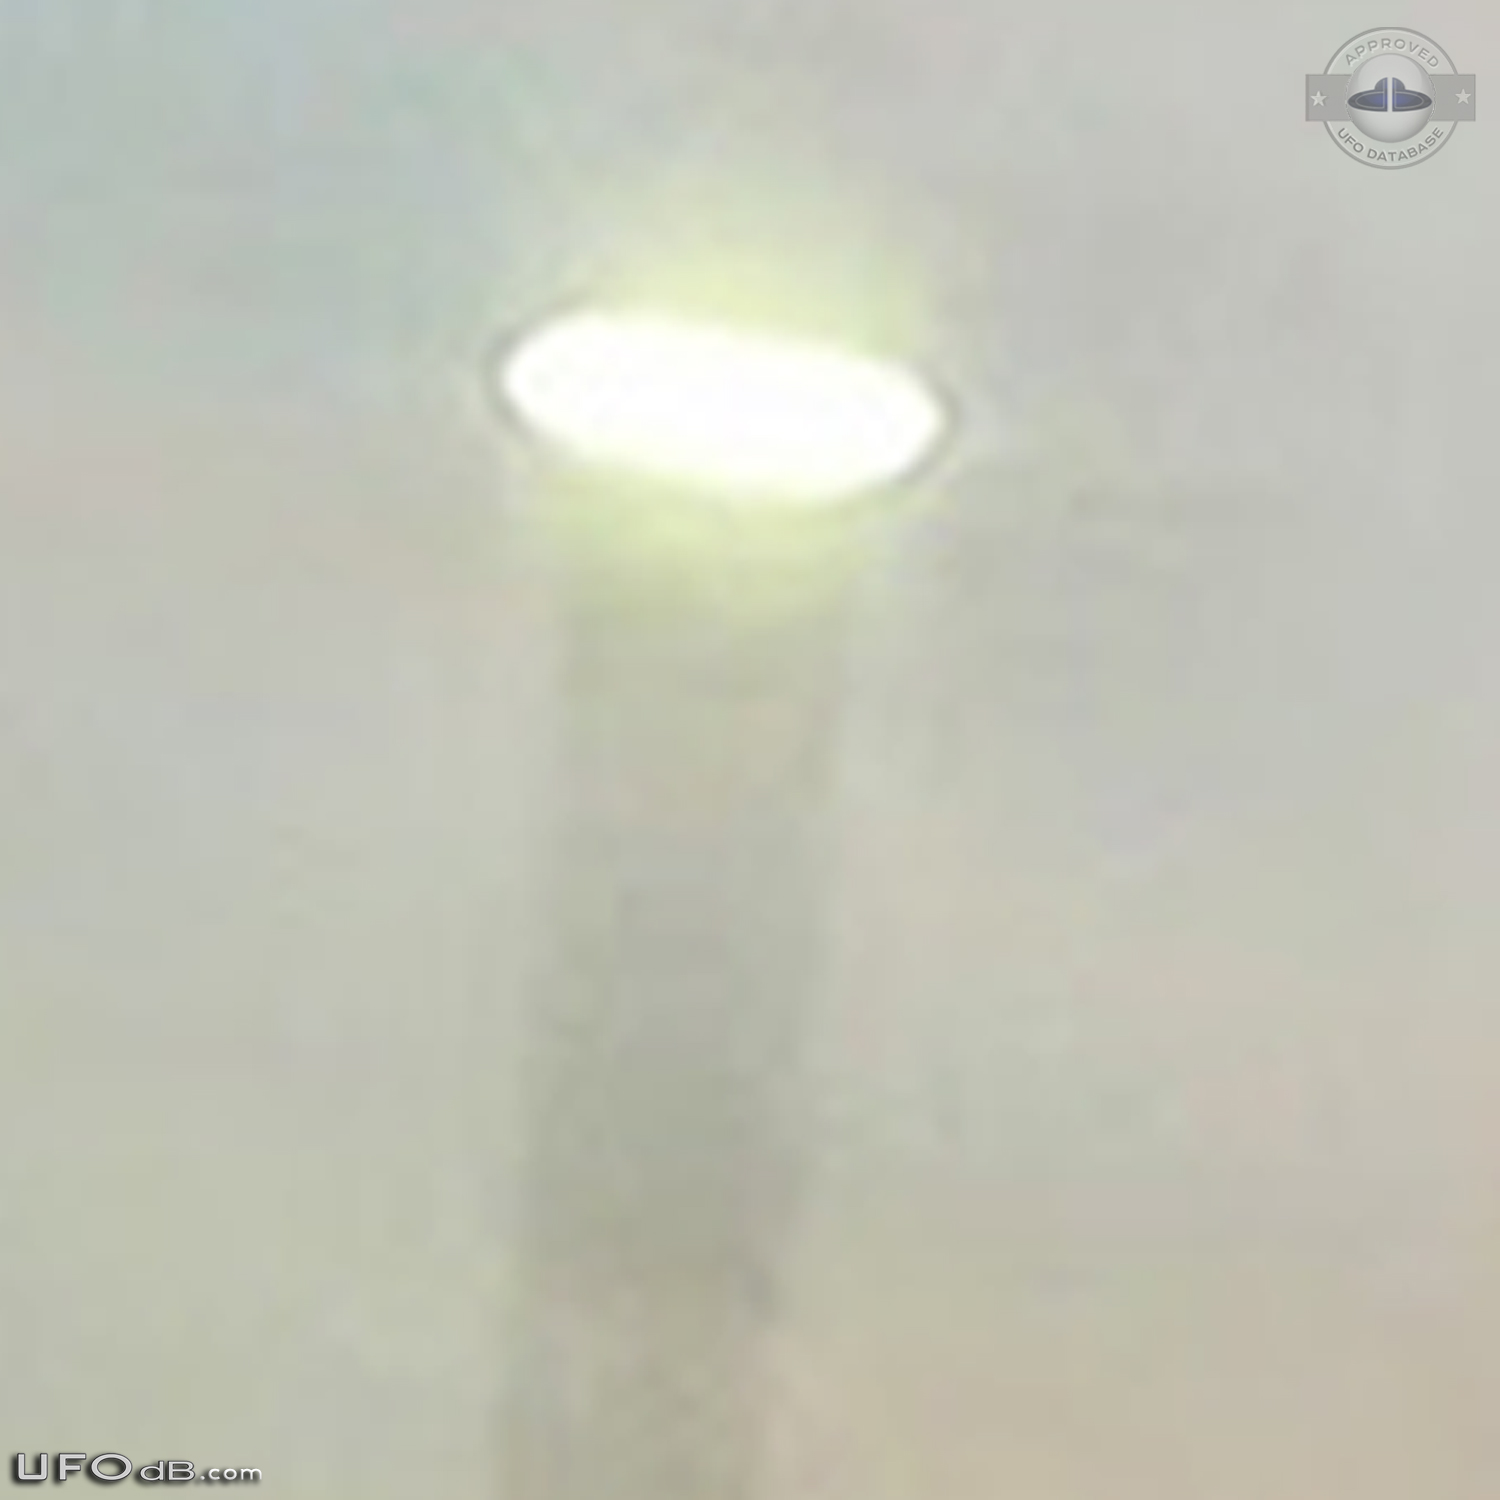 UFO saucer caught from car in Cottonwood California USA 2014 UFO Picture #589-5